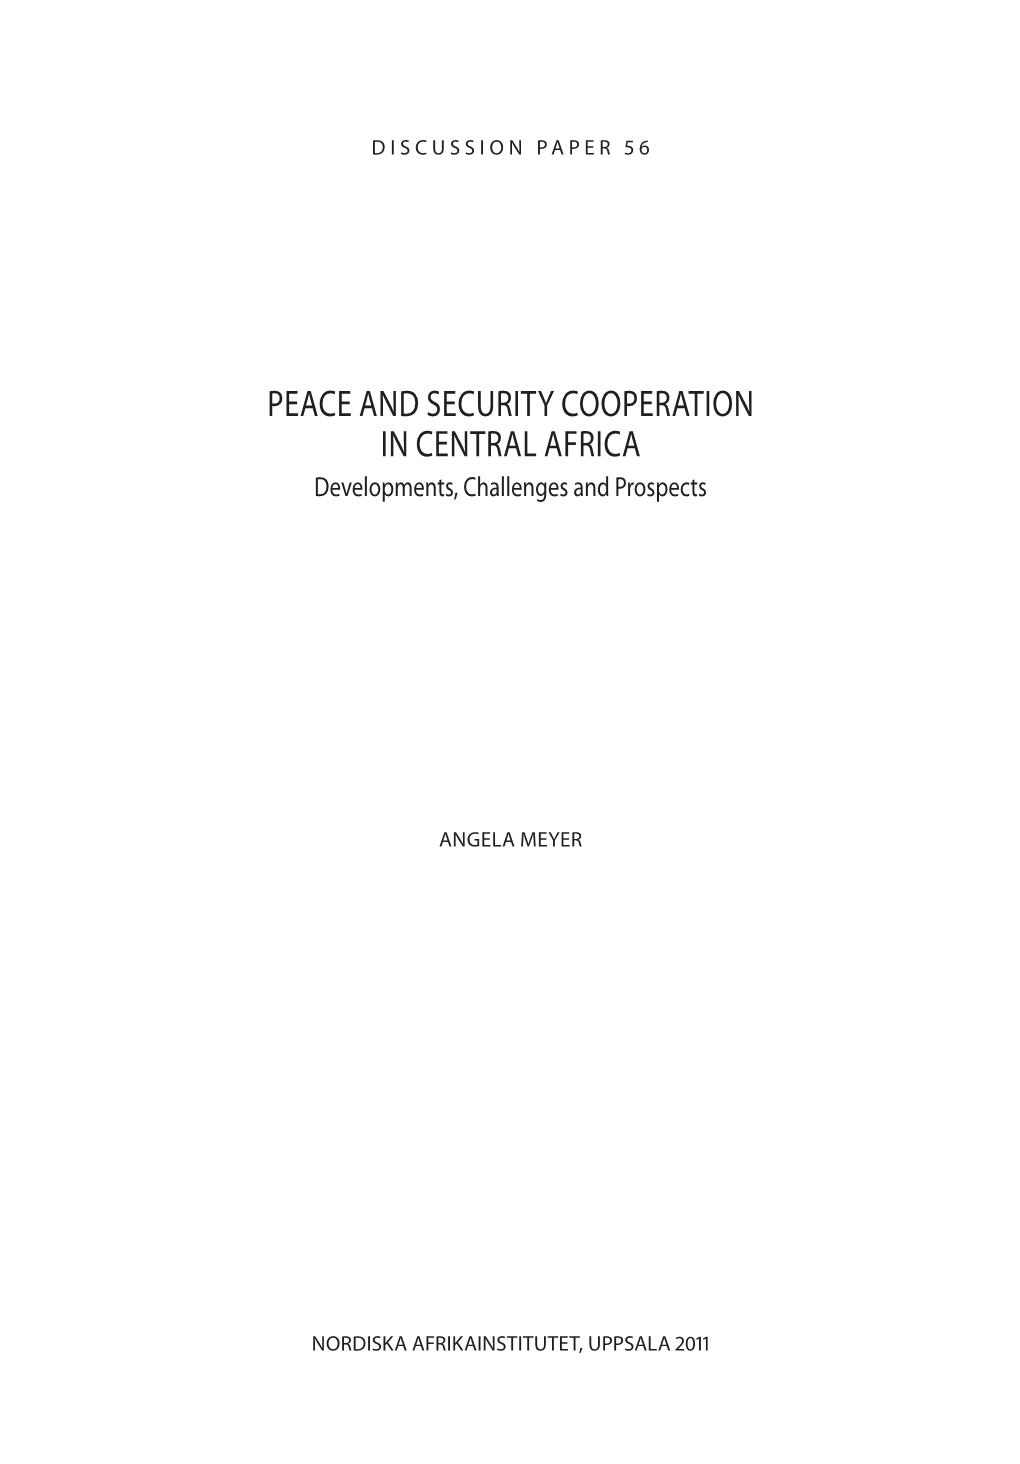 Peace and Security Cooperation in Central Africa